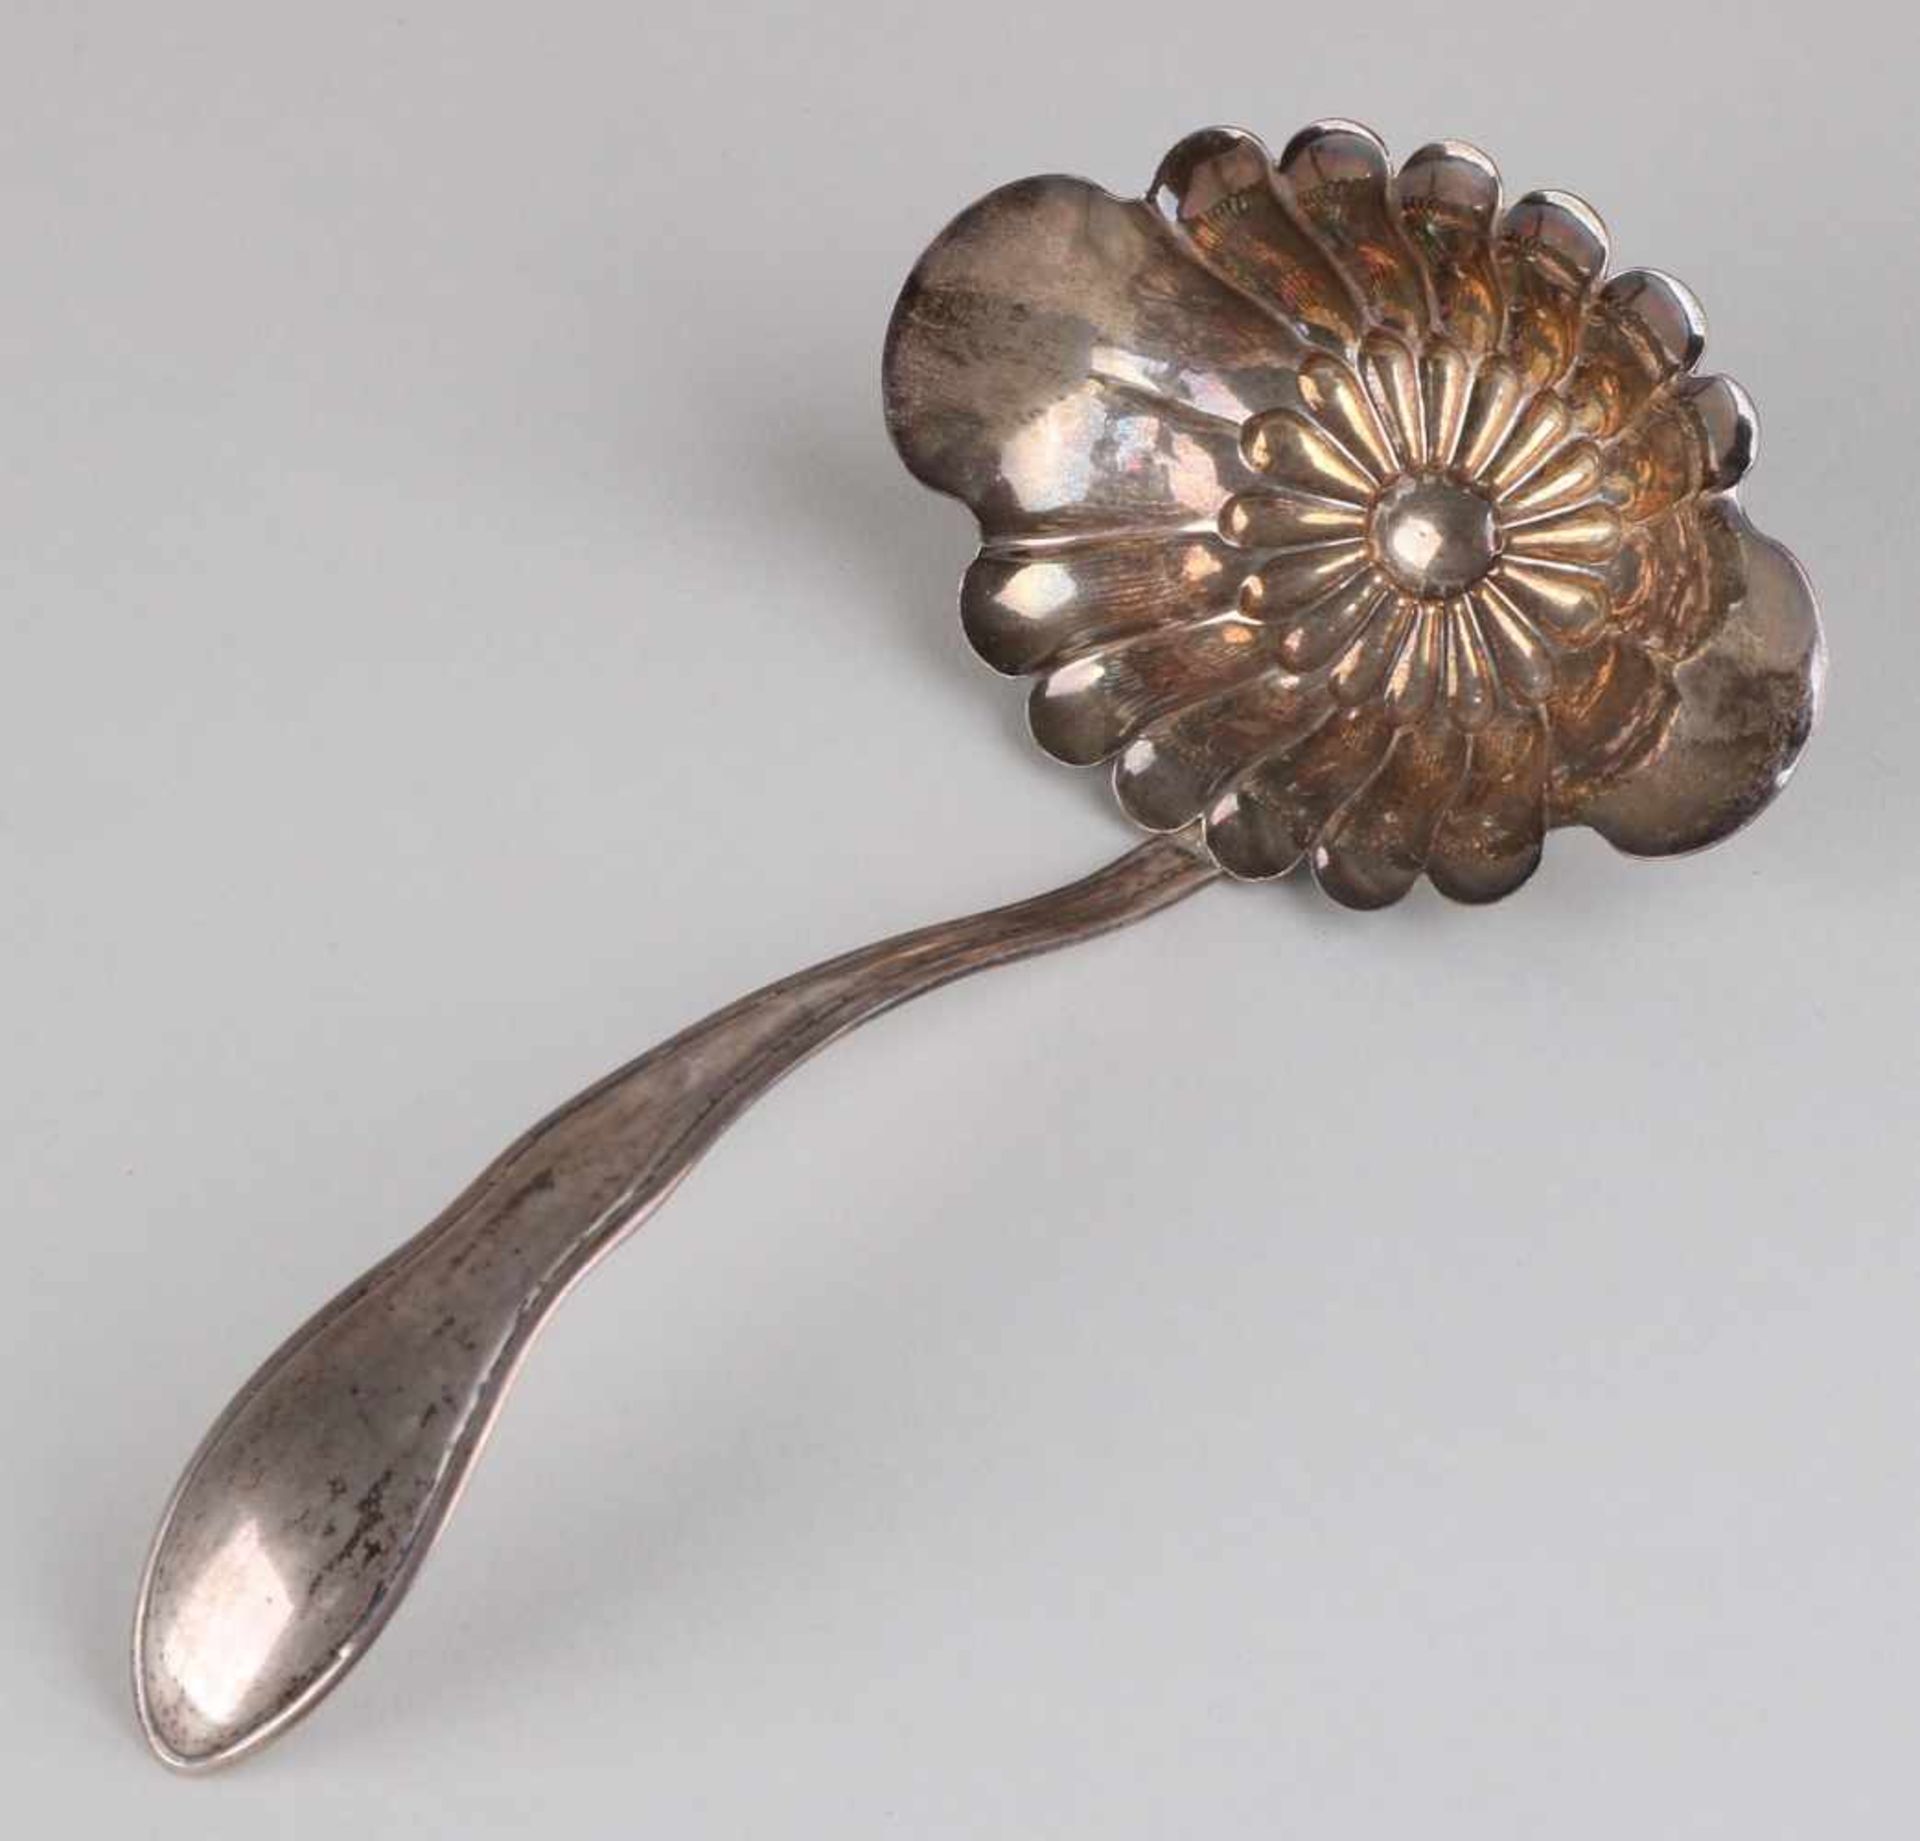 Silver gravy spoon, 833/000, with an oval contoured container attached to a contoured stem with